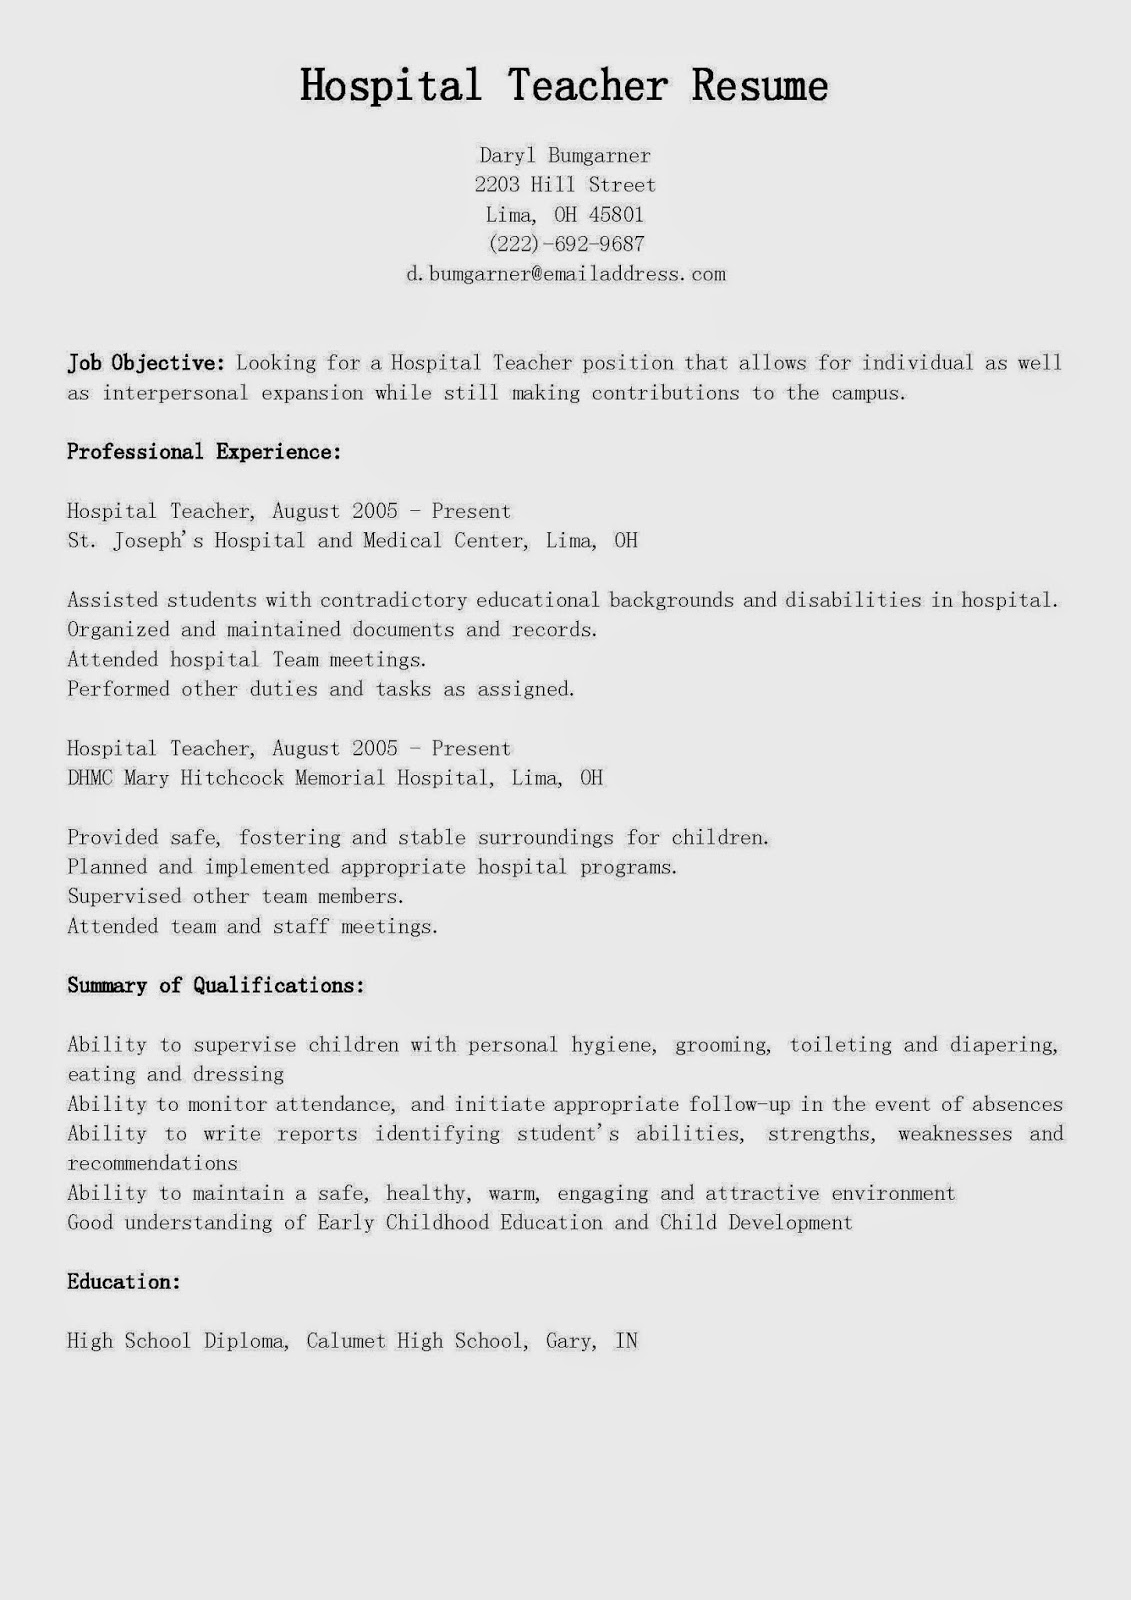 Weaknesses in a resume